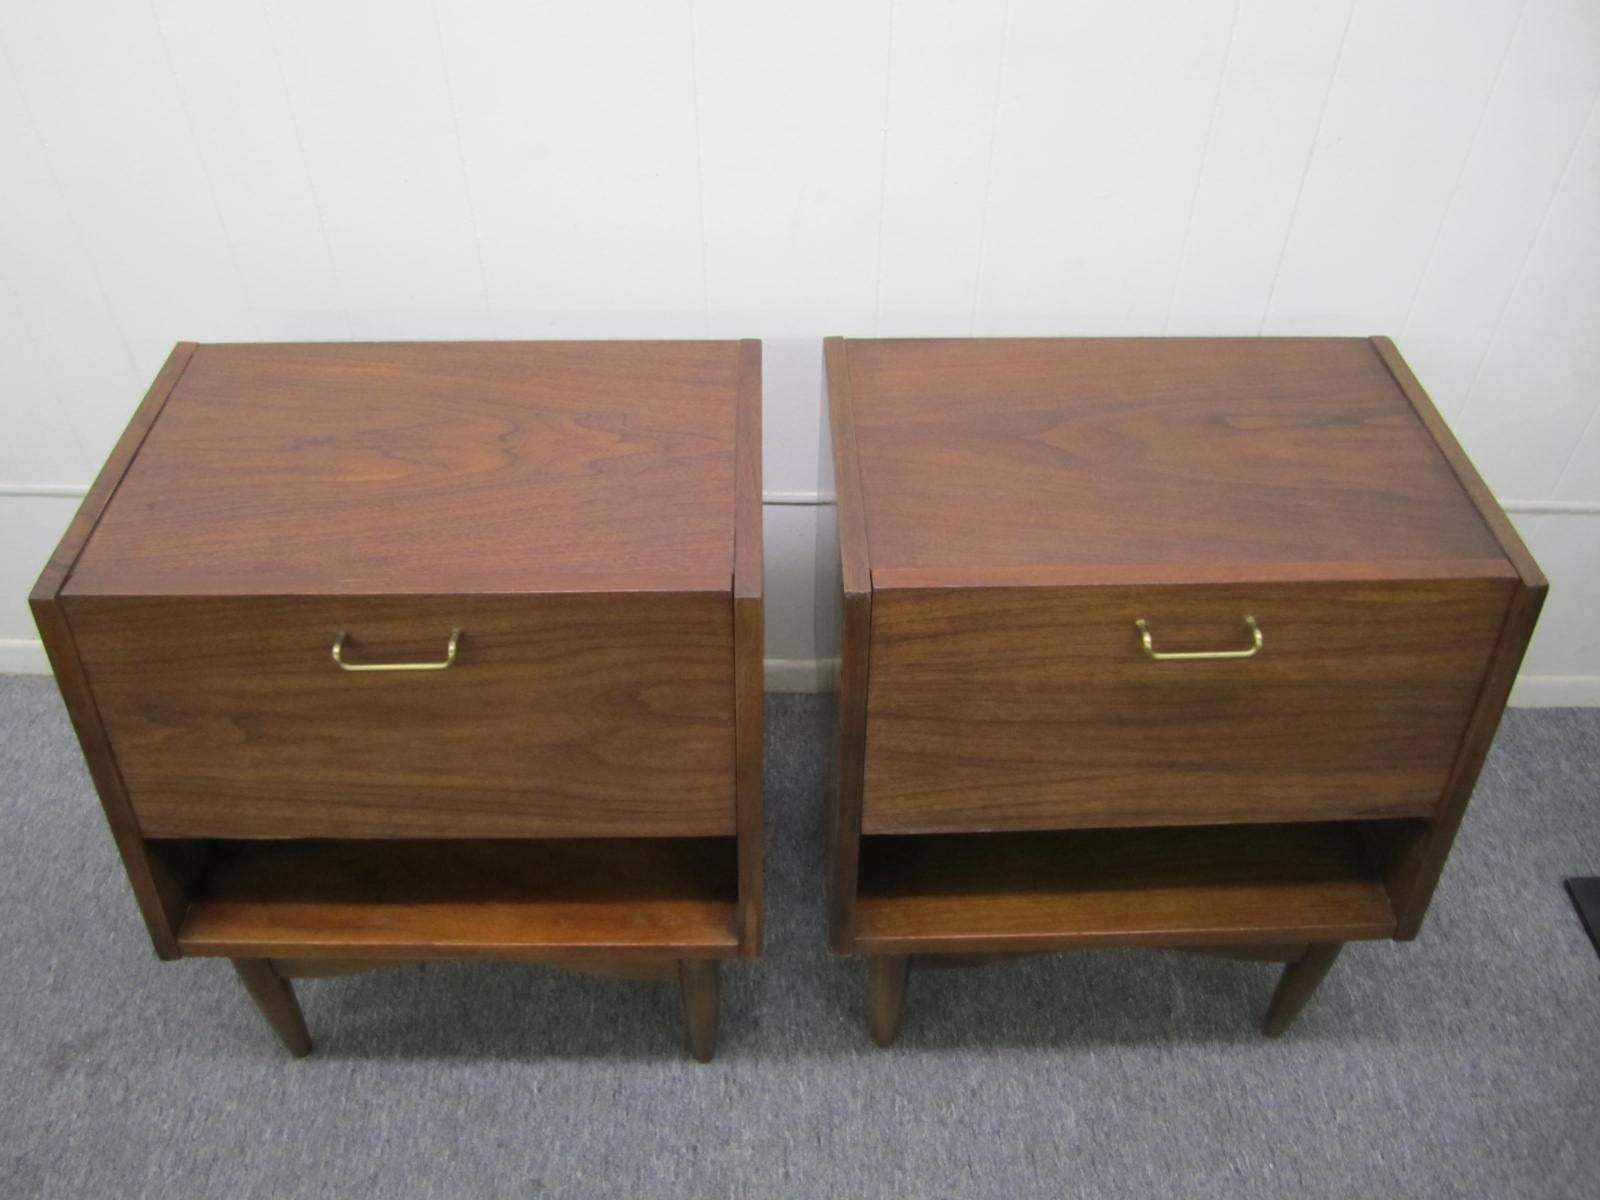 Great looking pair of American of Martinsville walnut nightstands. These stylish nightstands have a great flip down door opening to reveal a nice open space with on small drawer. The inside of the door has a durable Formica finish and works great